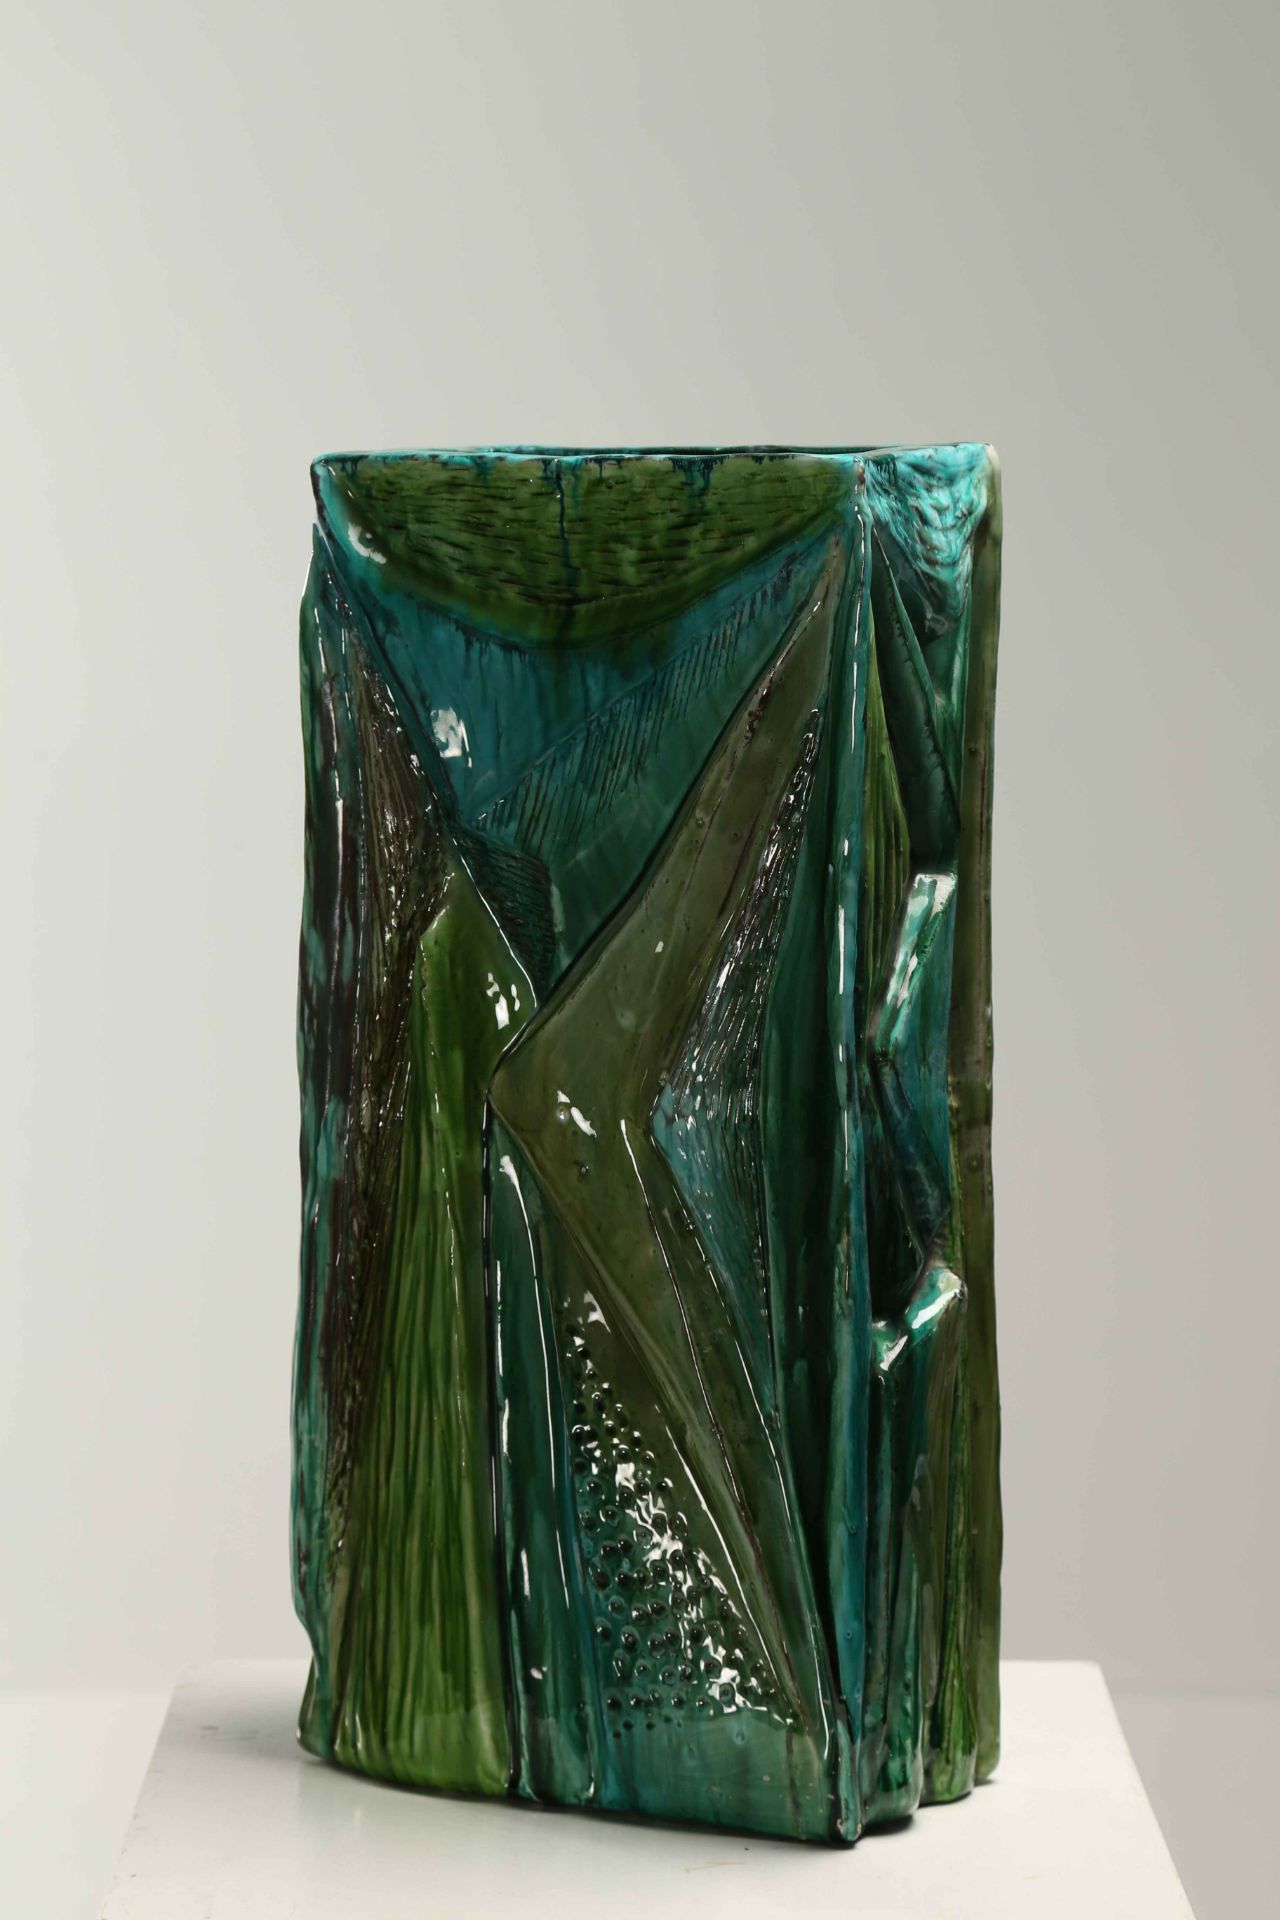 SCHIAVON ELIO (1925 - 2004)
Large earthenware parallelepiped vase with abstract sculpture in relief.